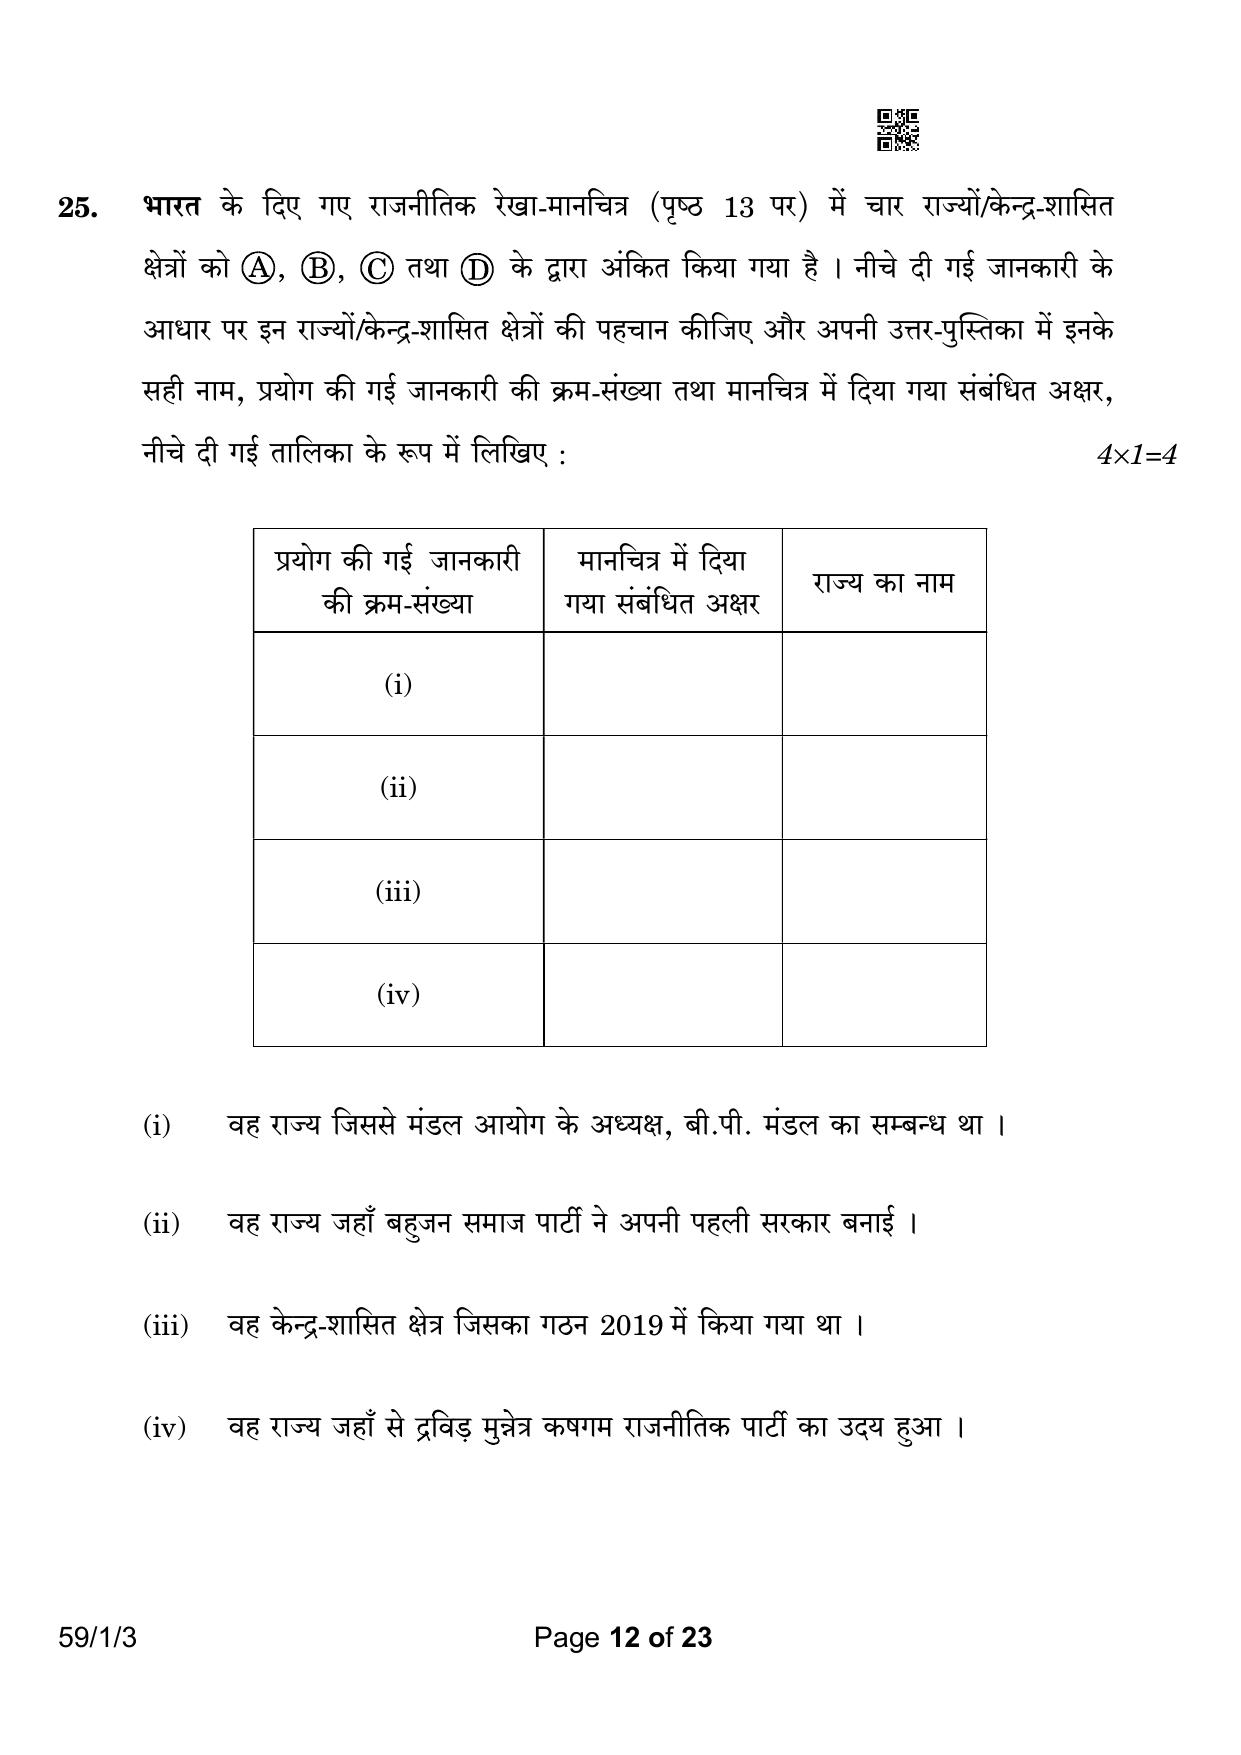 CBSE Class 12 59-1-3 Political Science 2023 Question Paper - Page 12